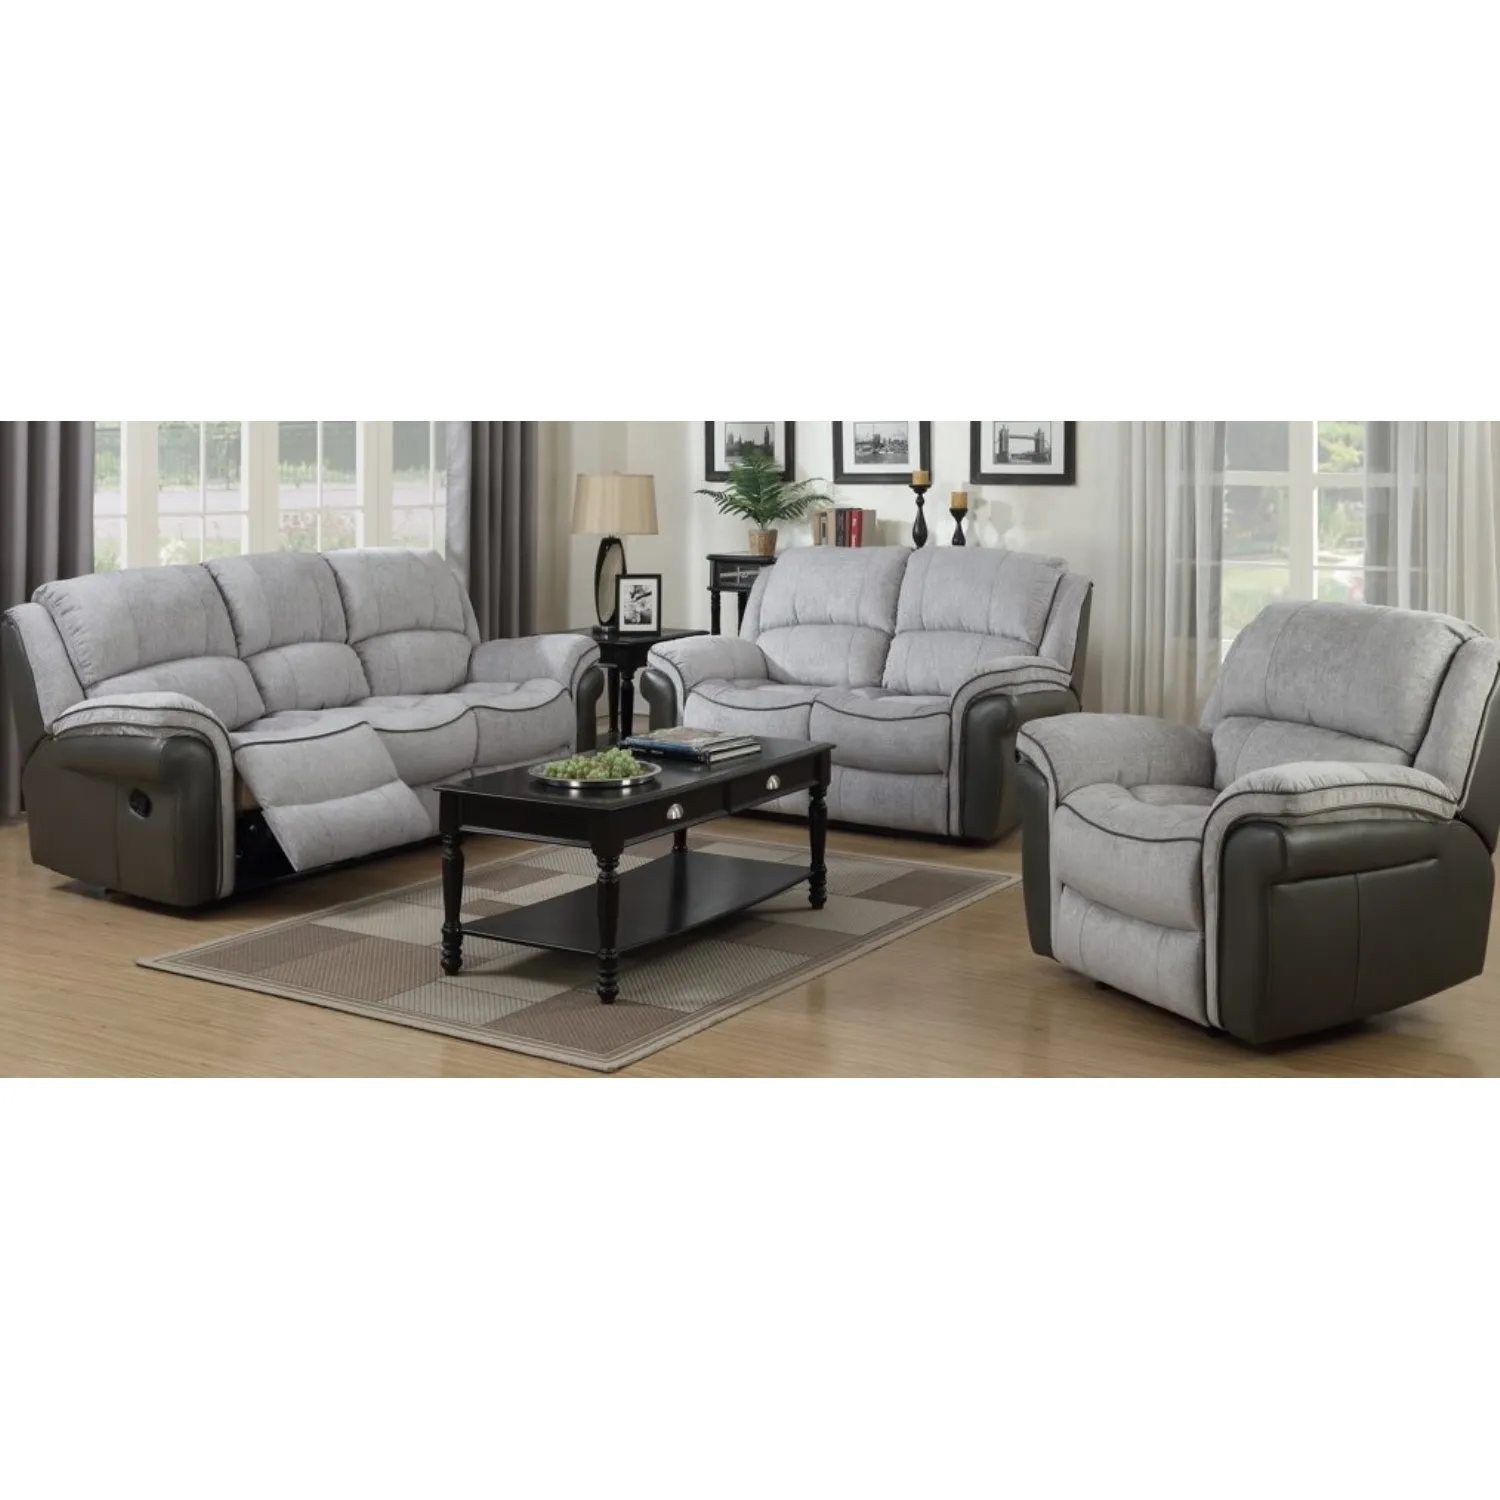 Grey Fabric and Leather Manual Reclining Sofa Set 321